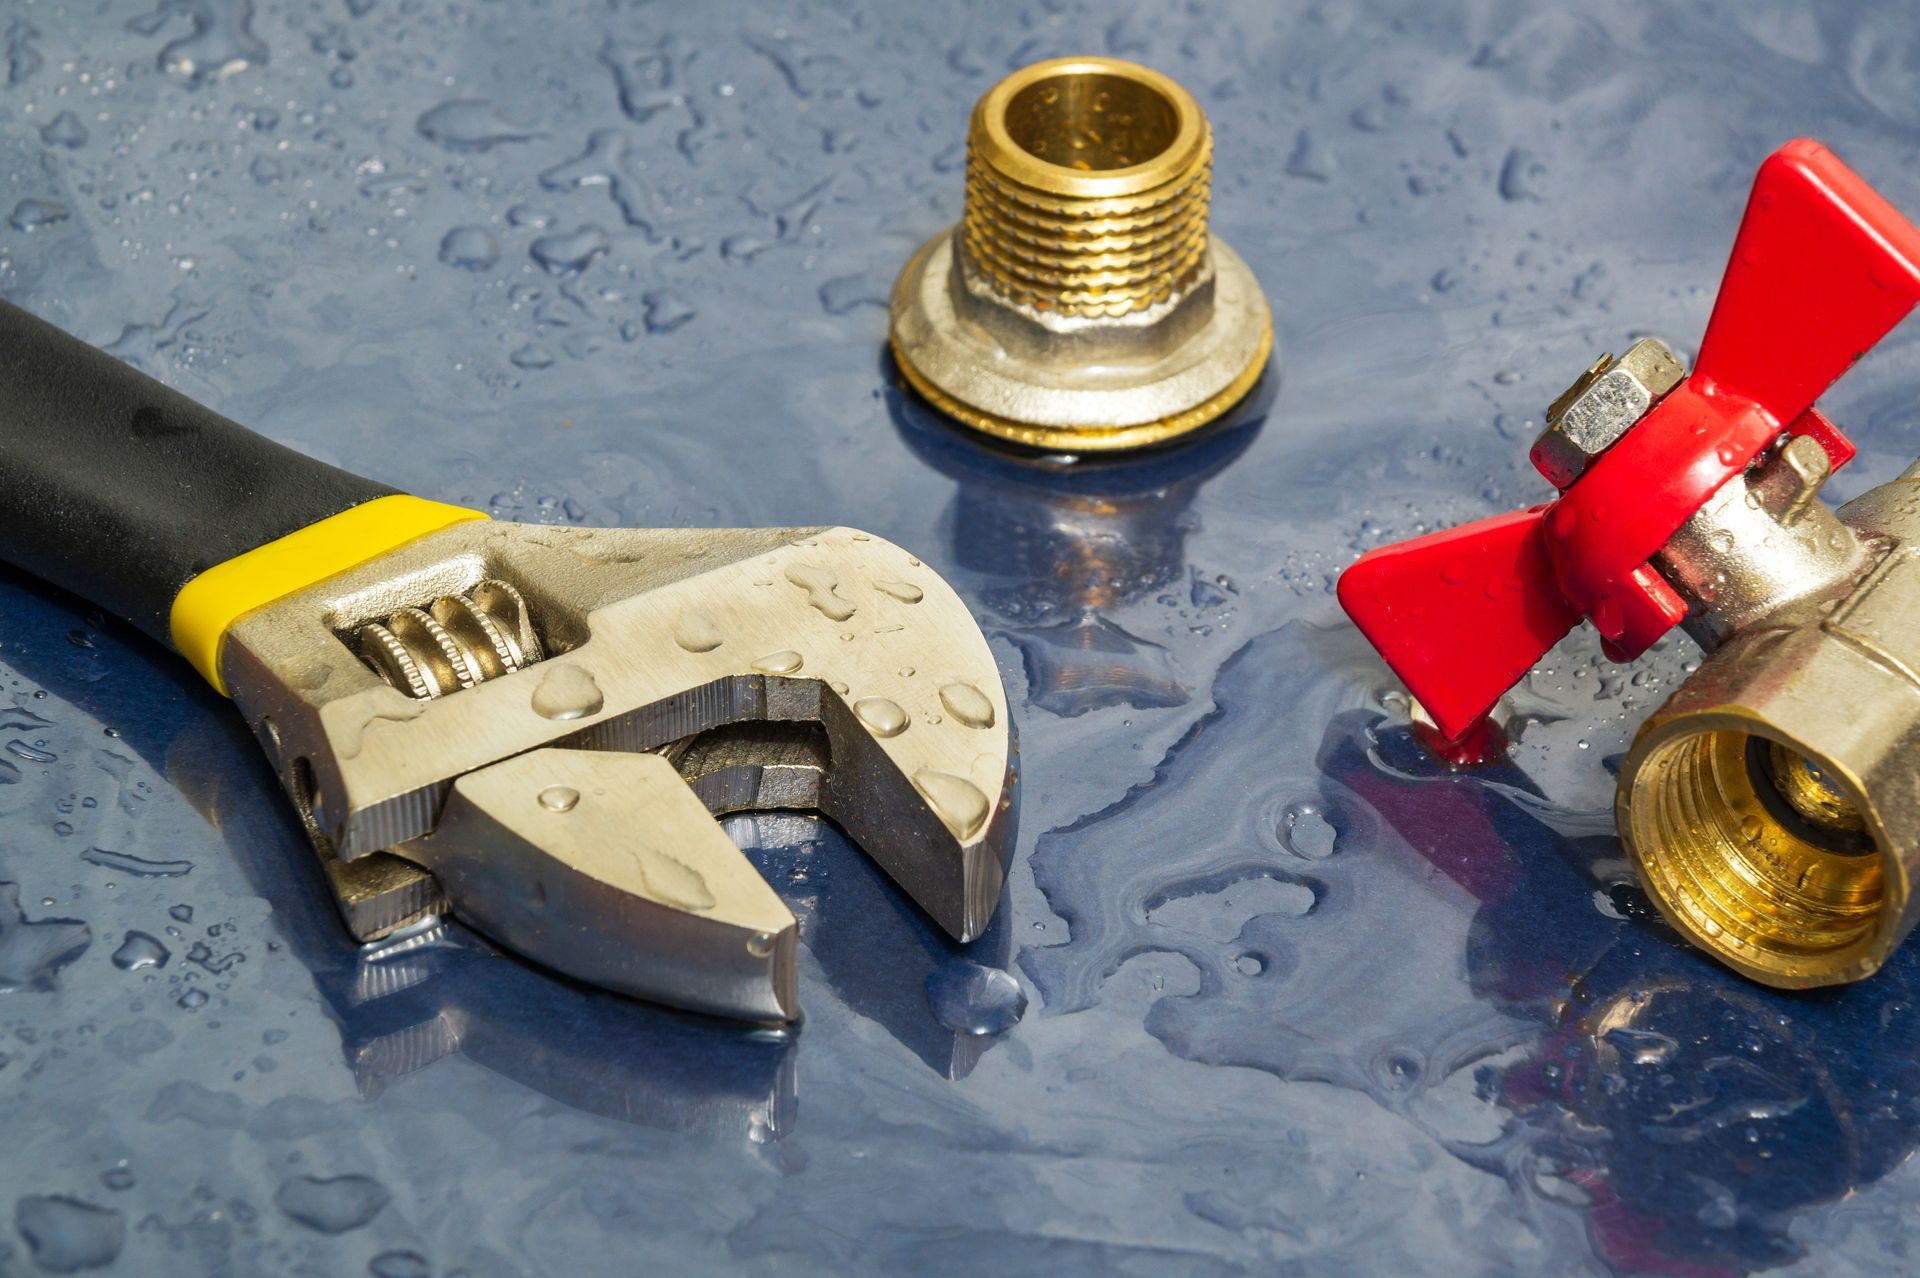 A wrench and a valve are sitting on a wet surface.